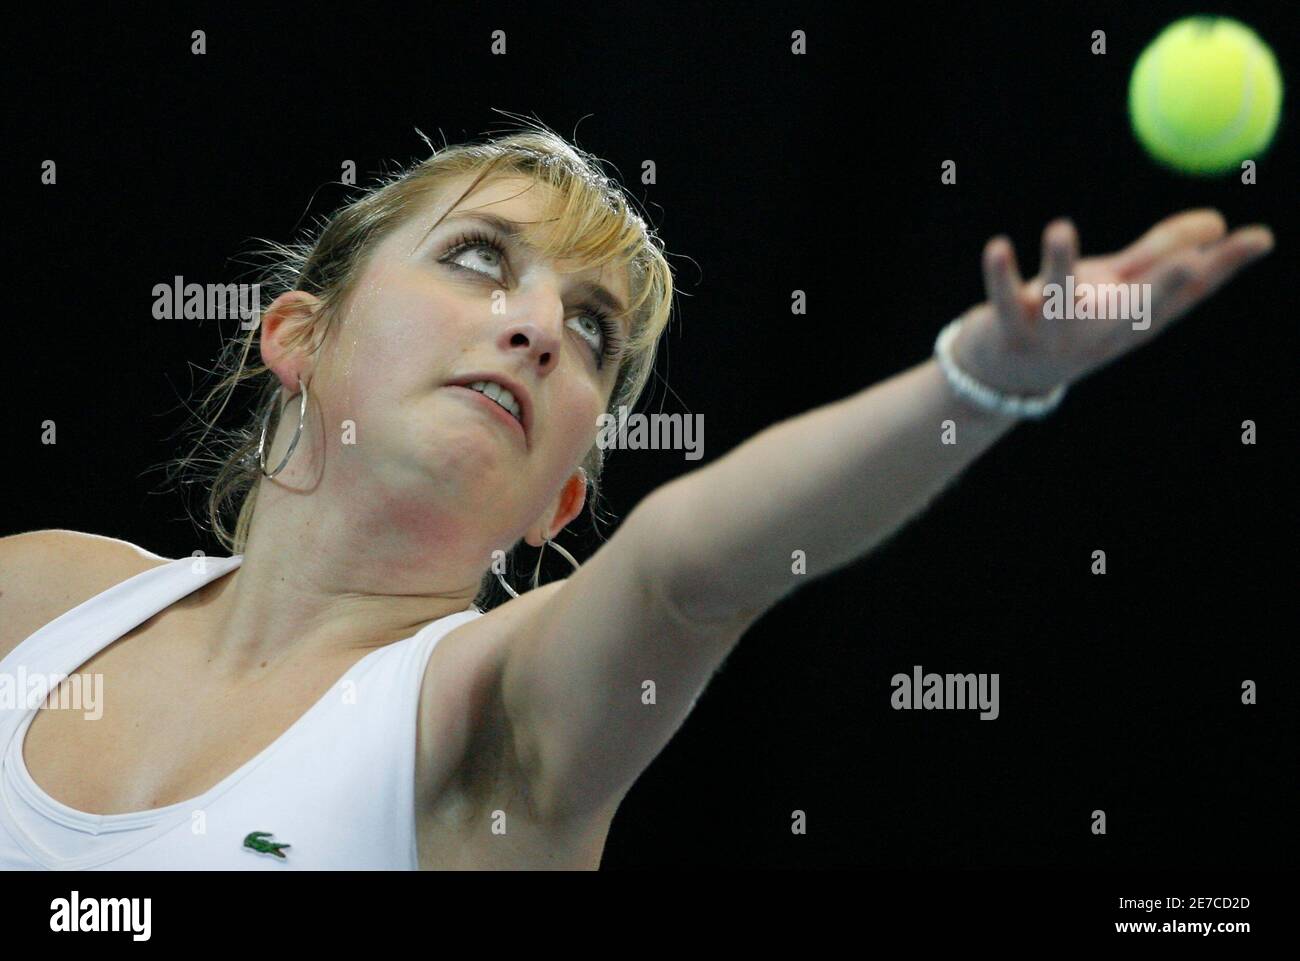 Switzerland's Timea Bacsinszky serves to Germany's Sabine Lisicki during  her Fed Cup tennis match in Zurich February 7, 2009. REUTERS/Christian  Hartmann (SWITZERLAND Stock Photo - Alamy